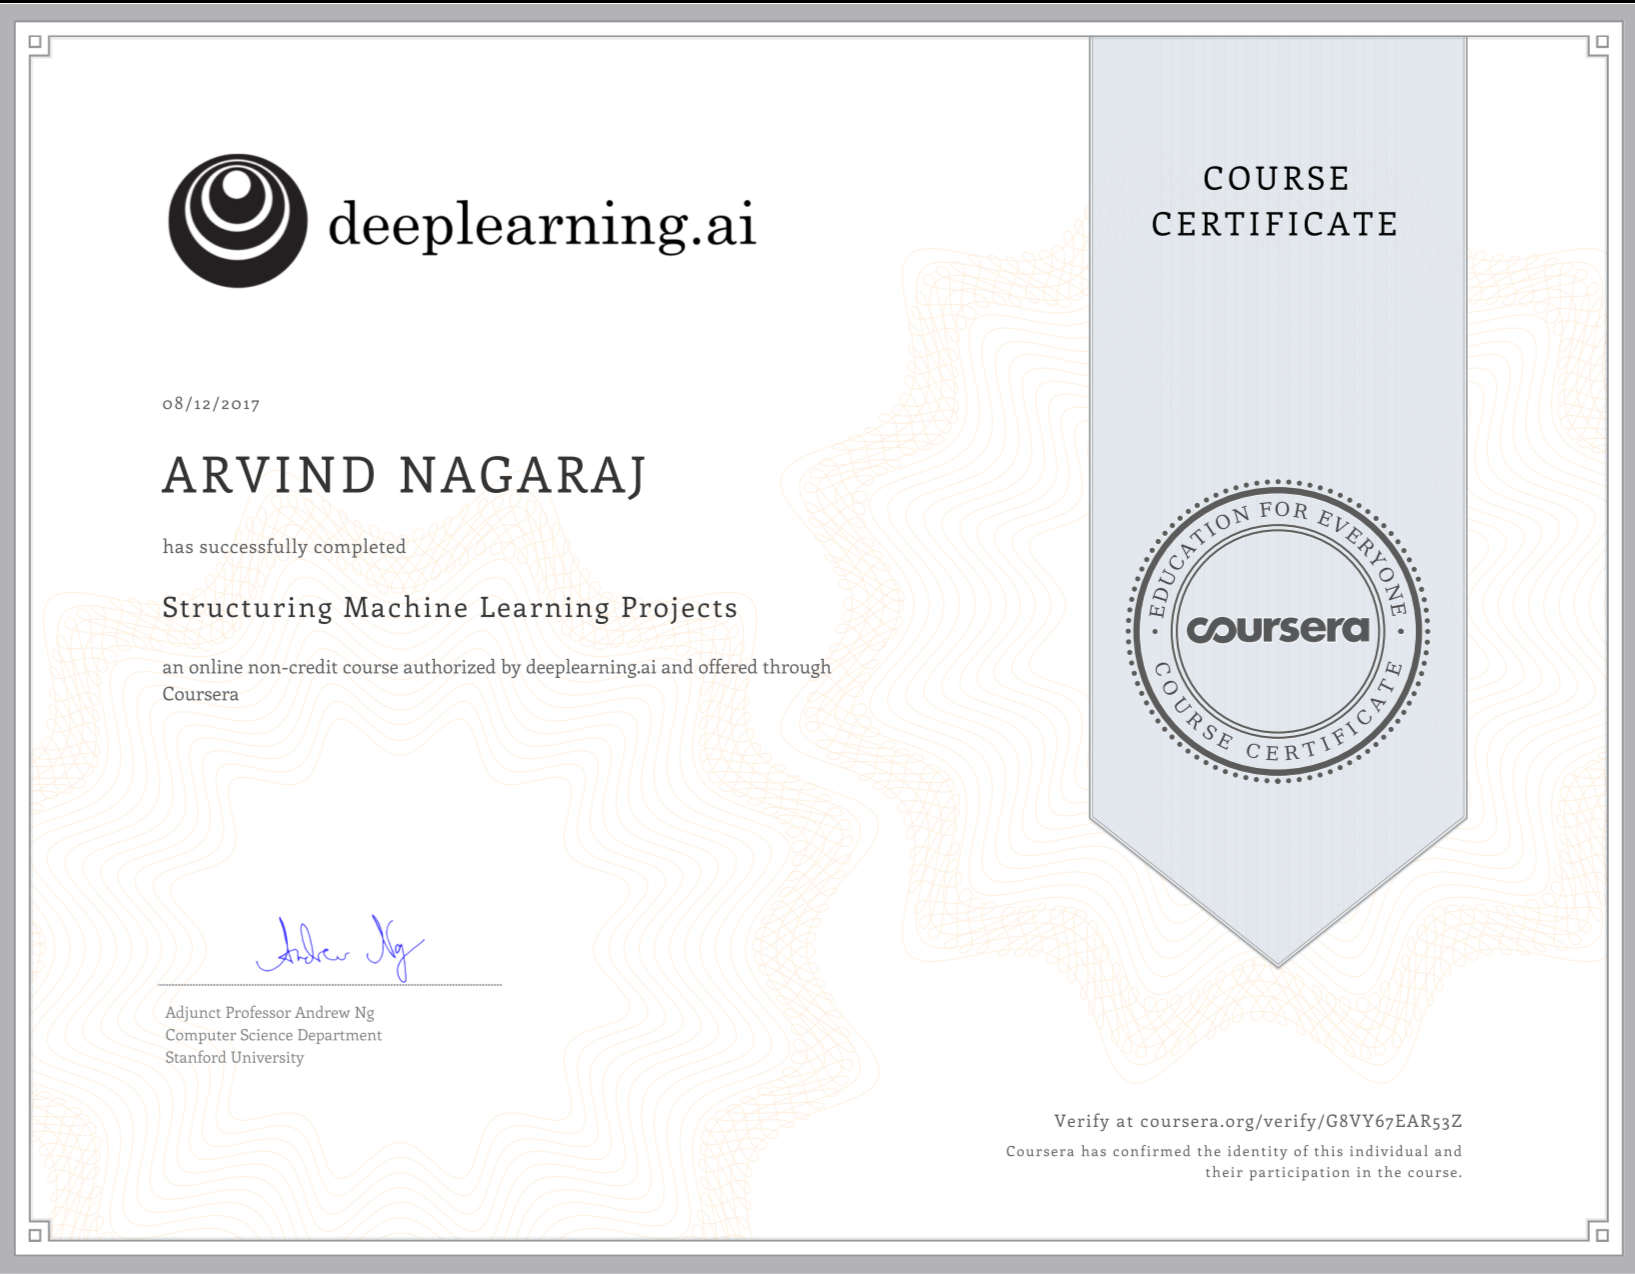 Deeplearning.ai courses 